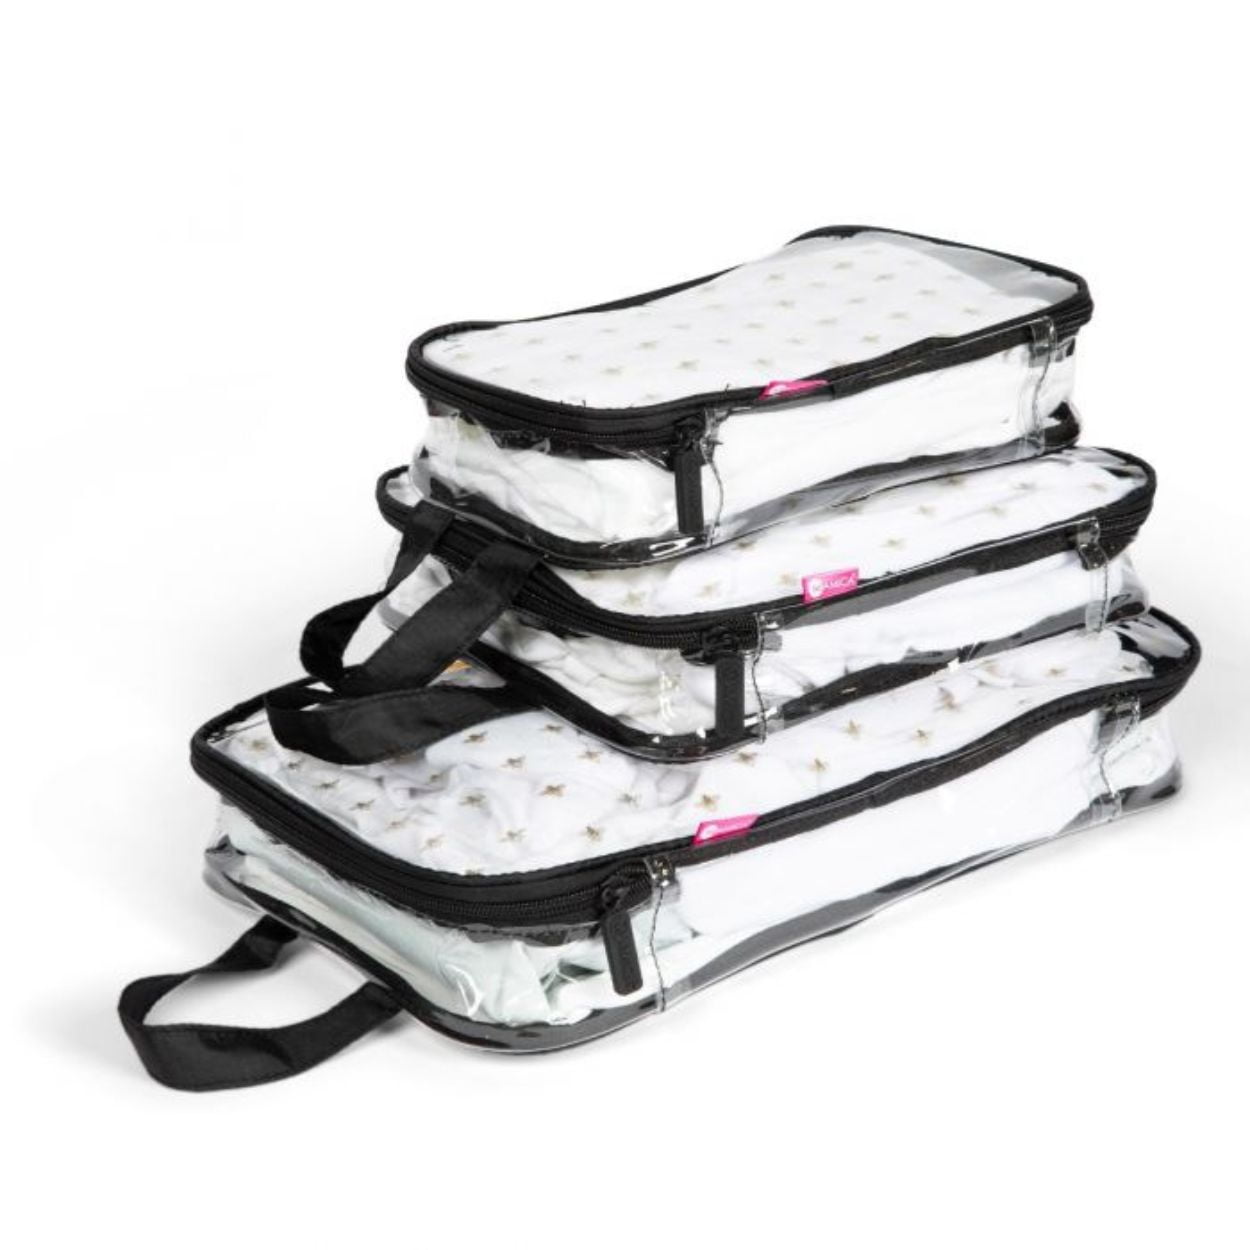 Miamica 3-Piece Luggage Packing Cubes, Black Bee Clear Design – Includes  Small, Medium and Large Suitcase Organizers with Durable Design 